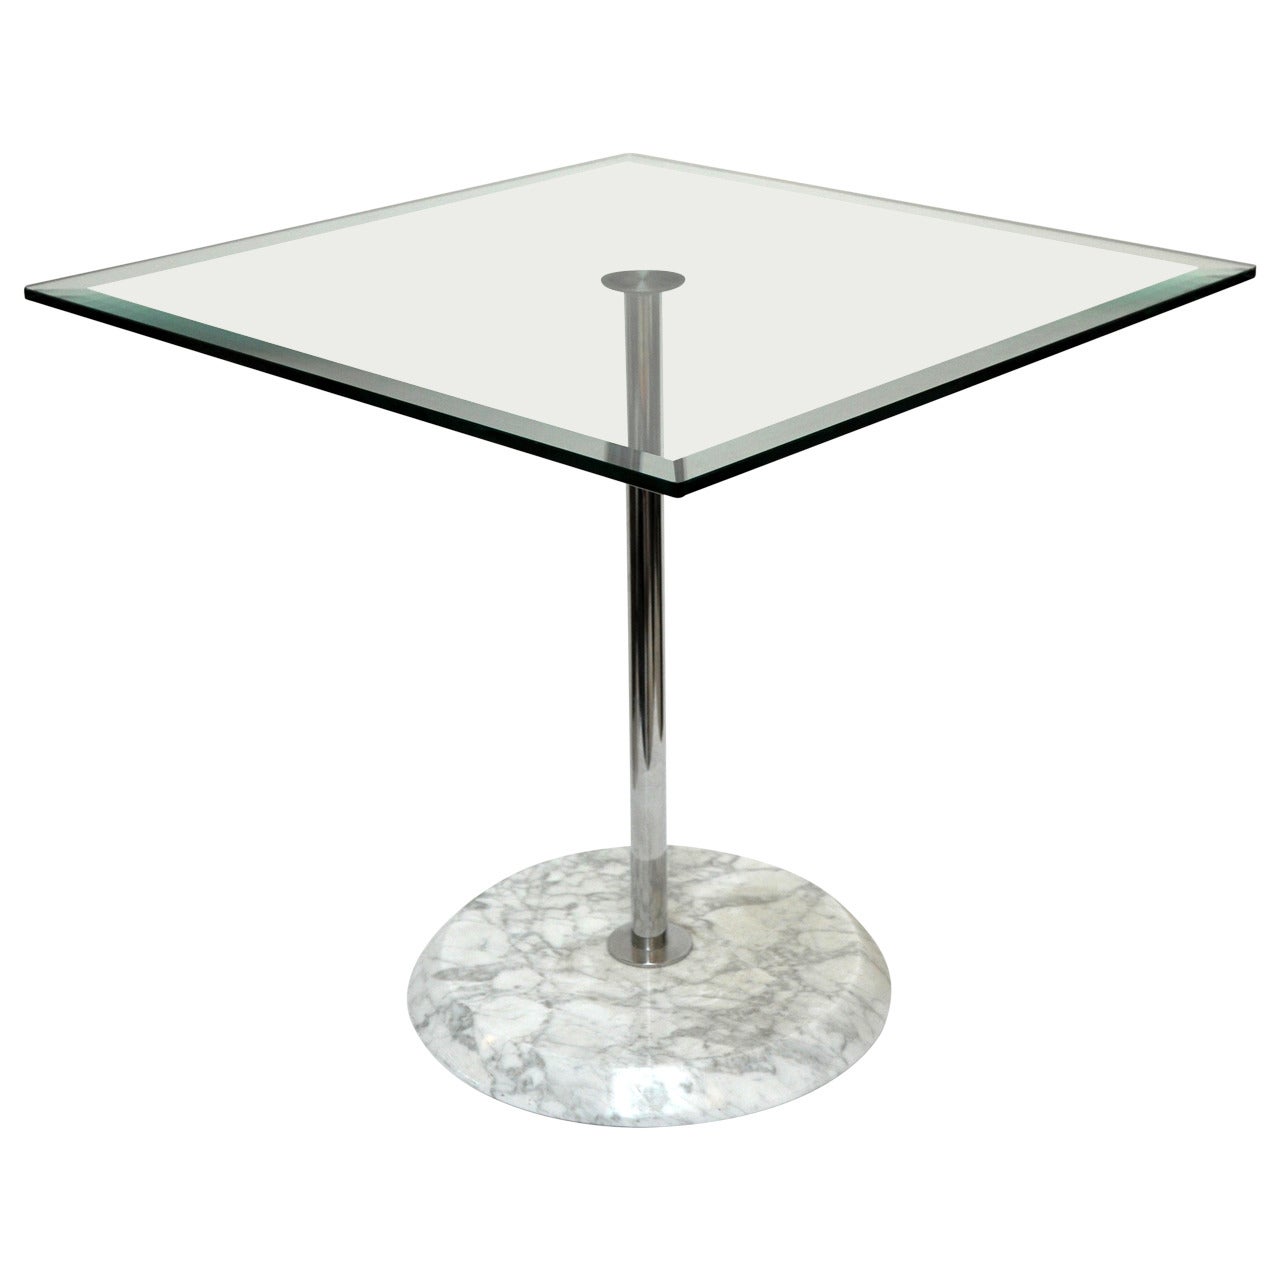 1960s Italian Chrome and Glass Occasional Table For Sale